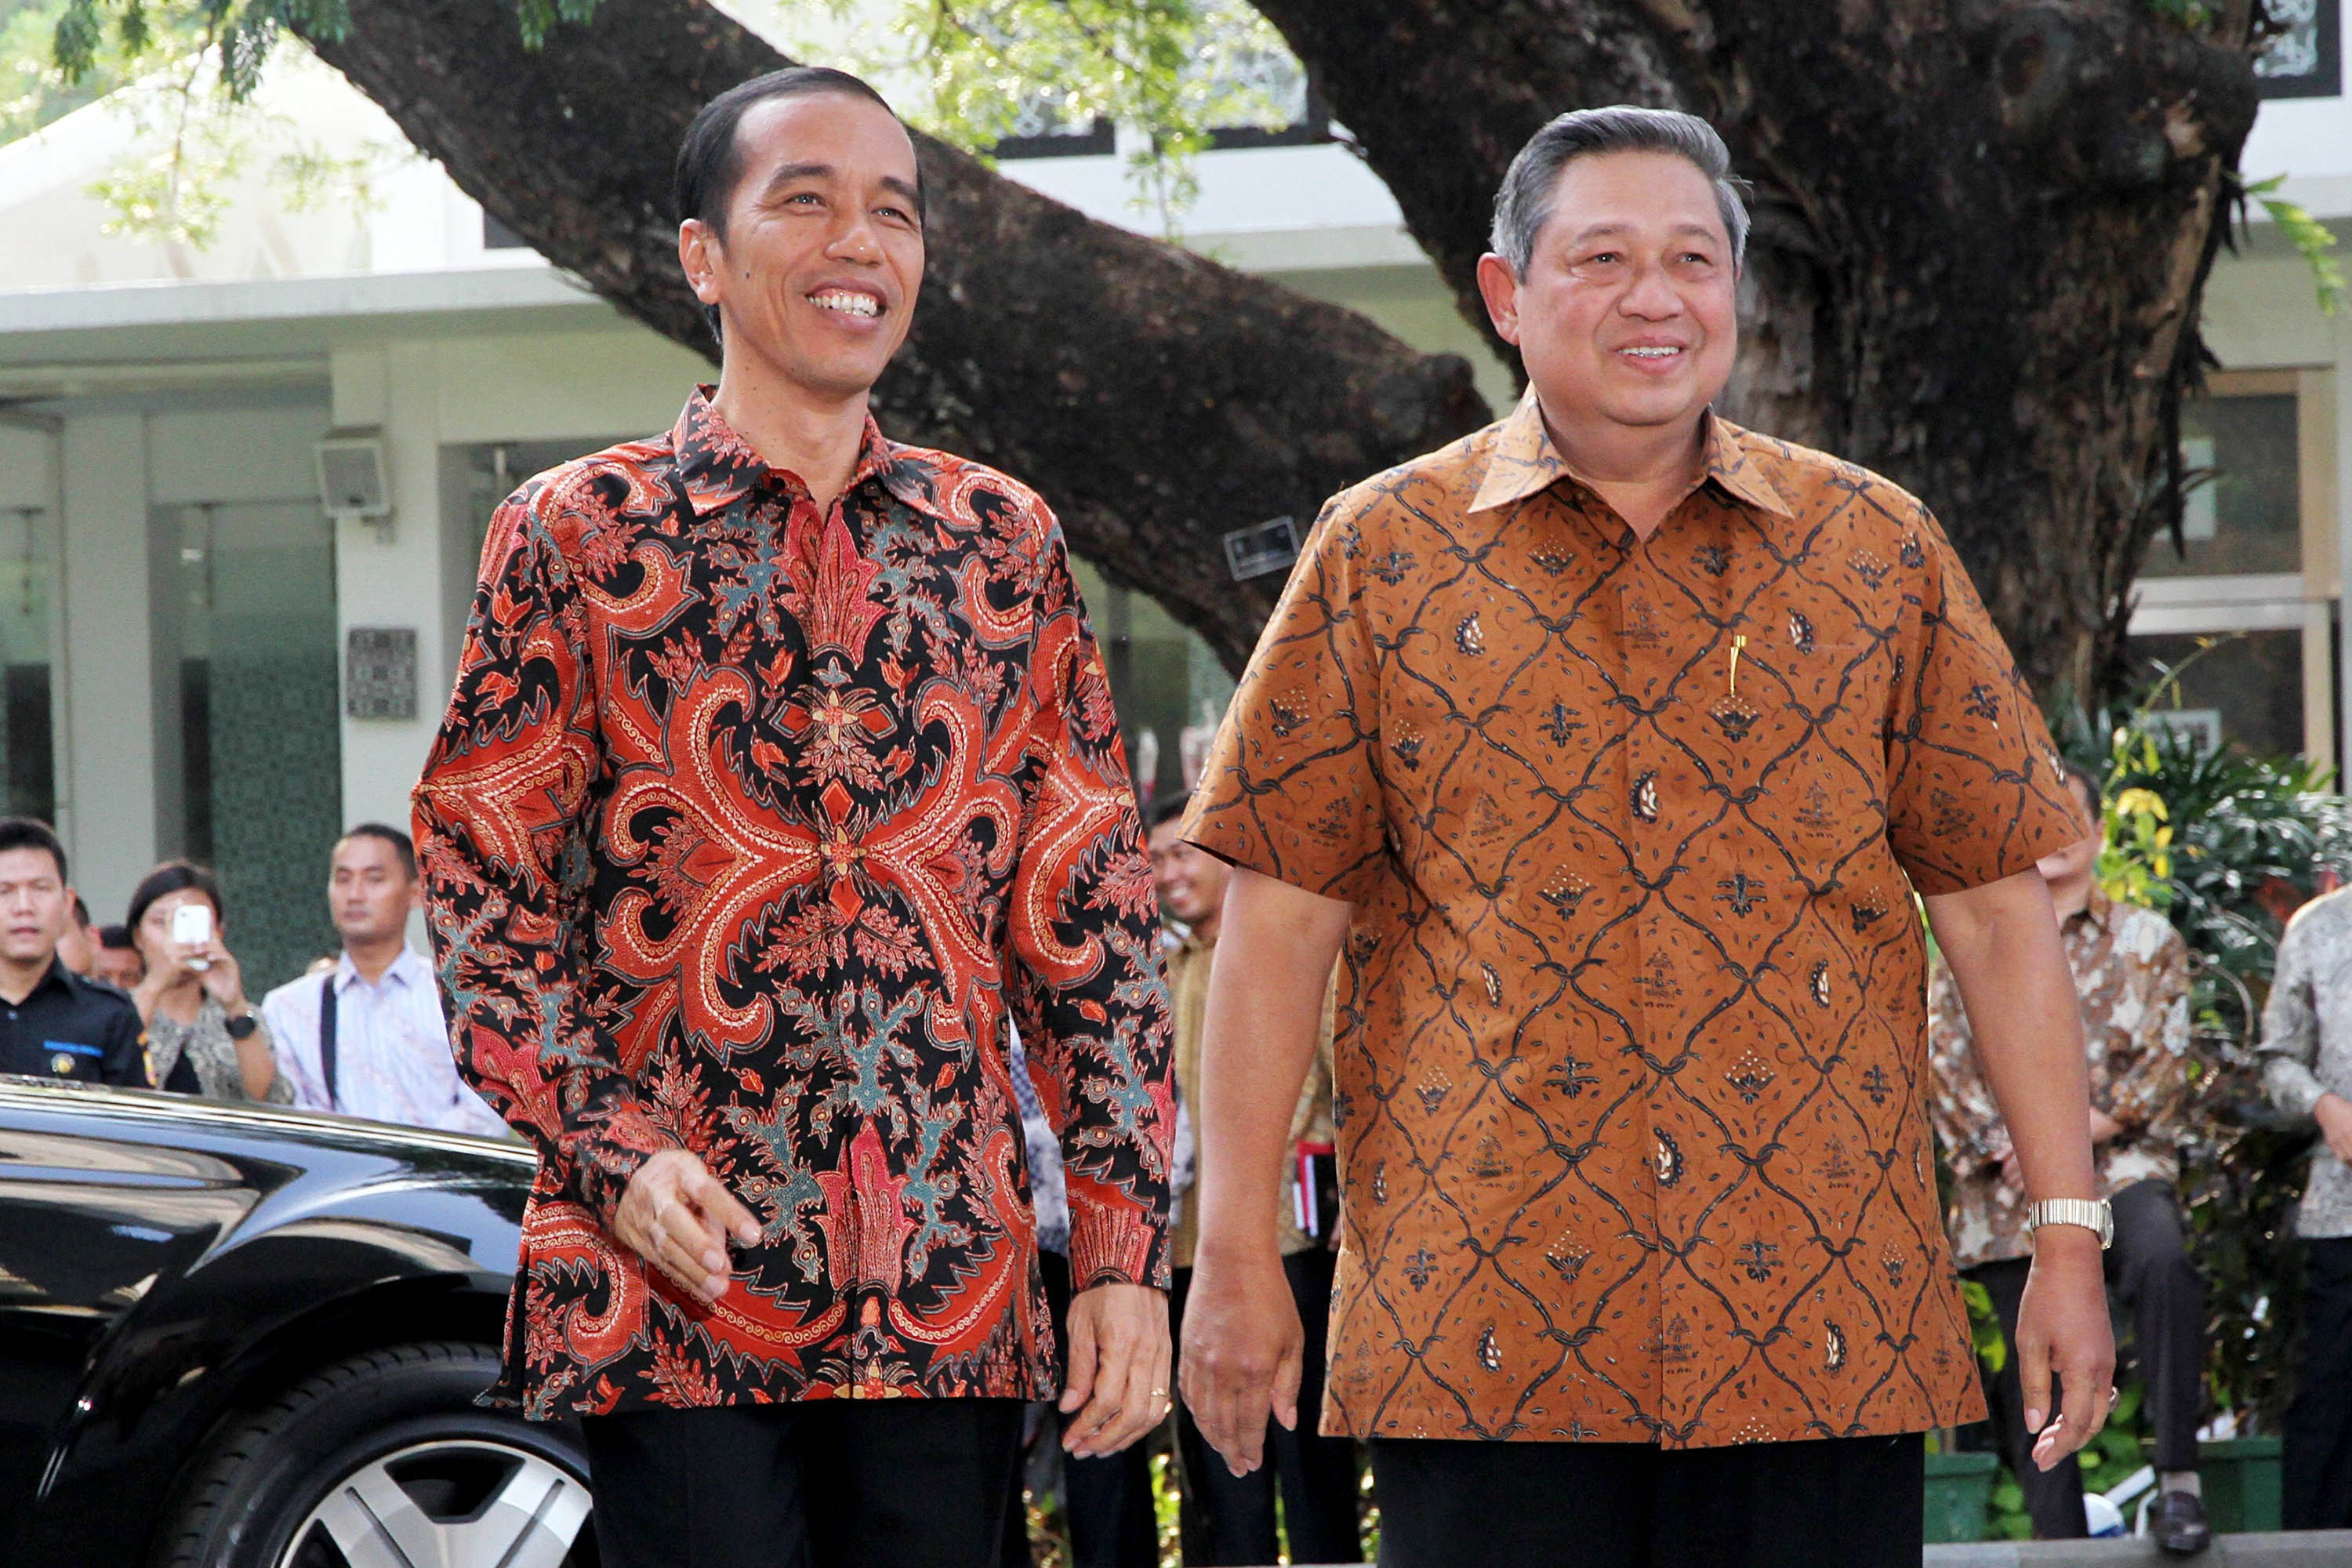 Incoming Indonesian President Joko Widodo, left, is greeted by outgoing president Susilo Bambang Yudhoyono during a visit at the presidential palace in Jakarta, Indonesia, on Oct. 19, 2014. (Anadolu Agency—Getty Images)